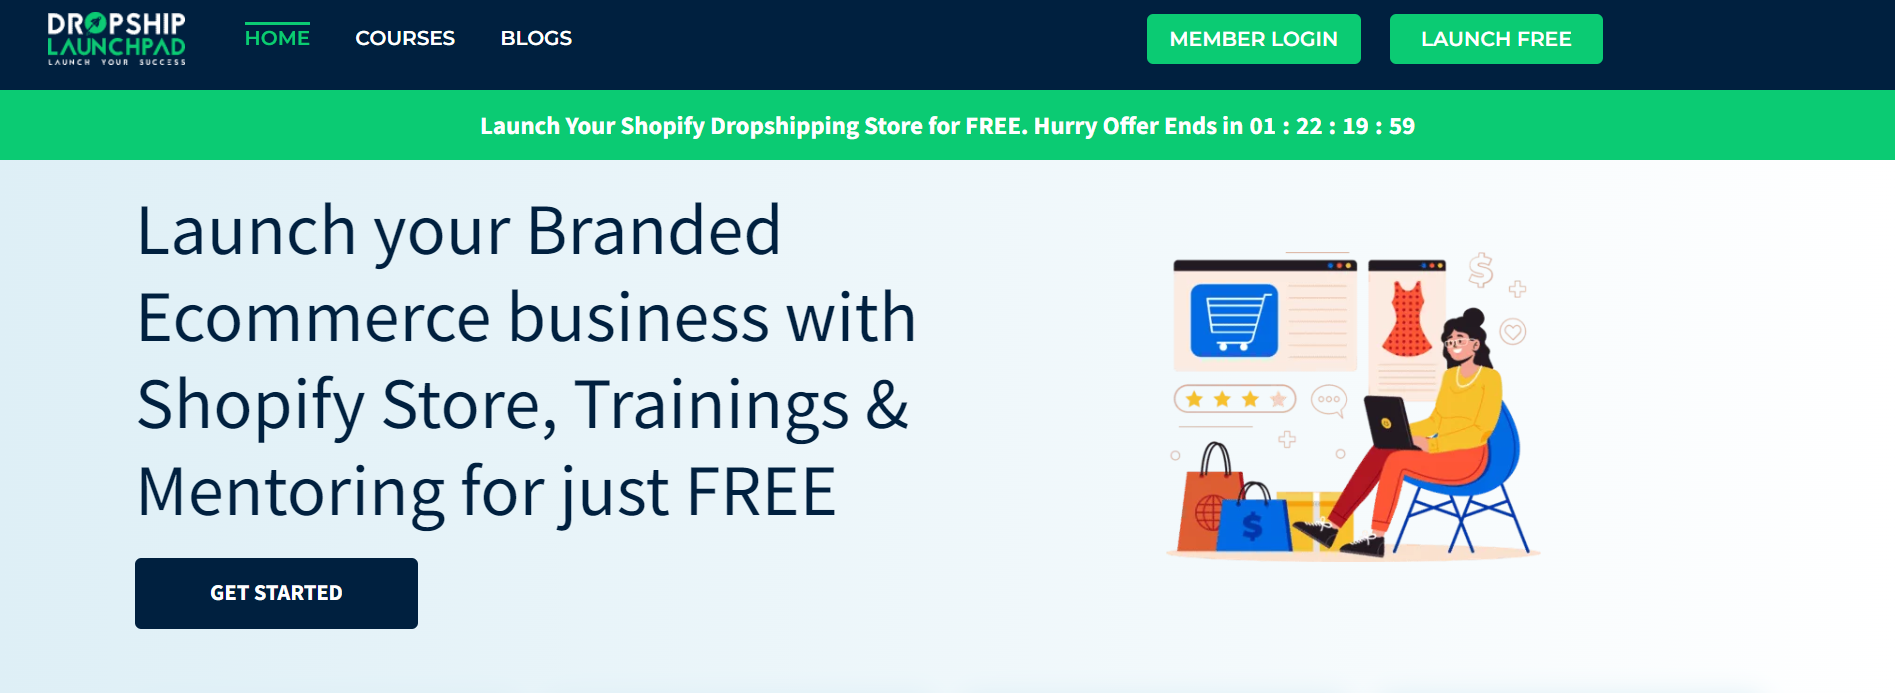 How does Dropship Launchpad help me find and sell high-demand dropshipping products?